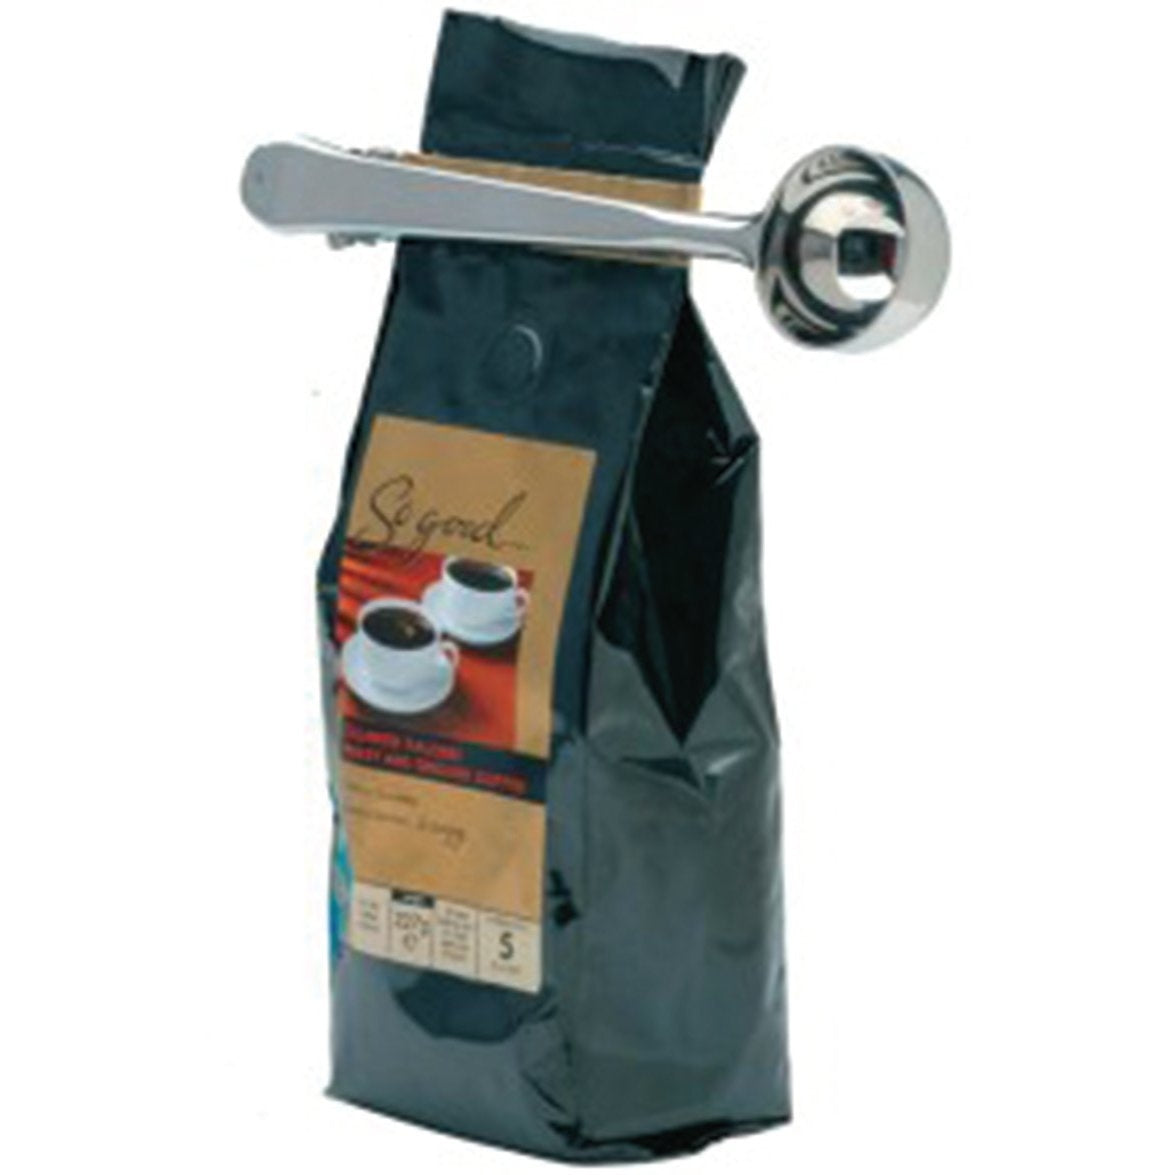 All-in-One Coffee, Tea and Spice Measurer and Bag Clip